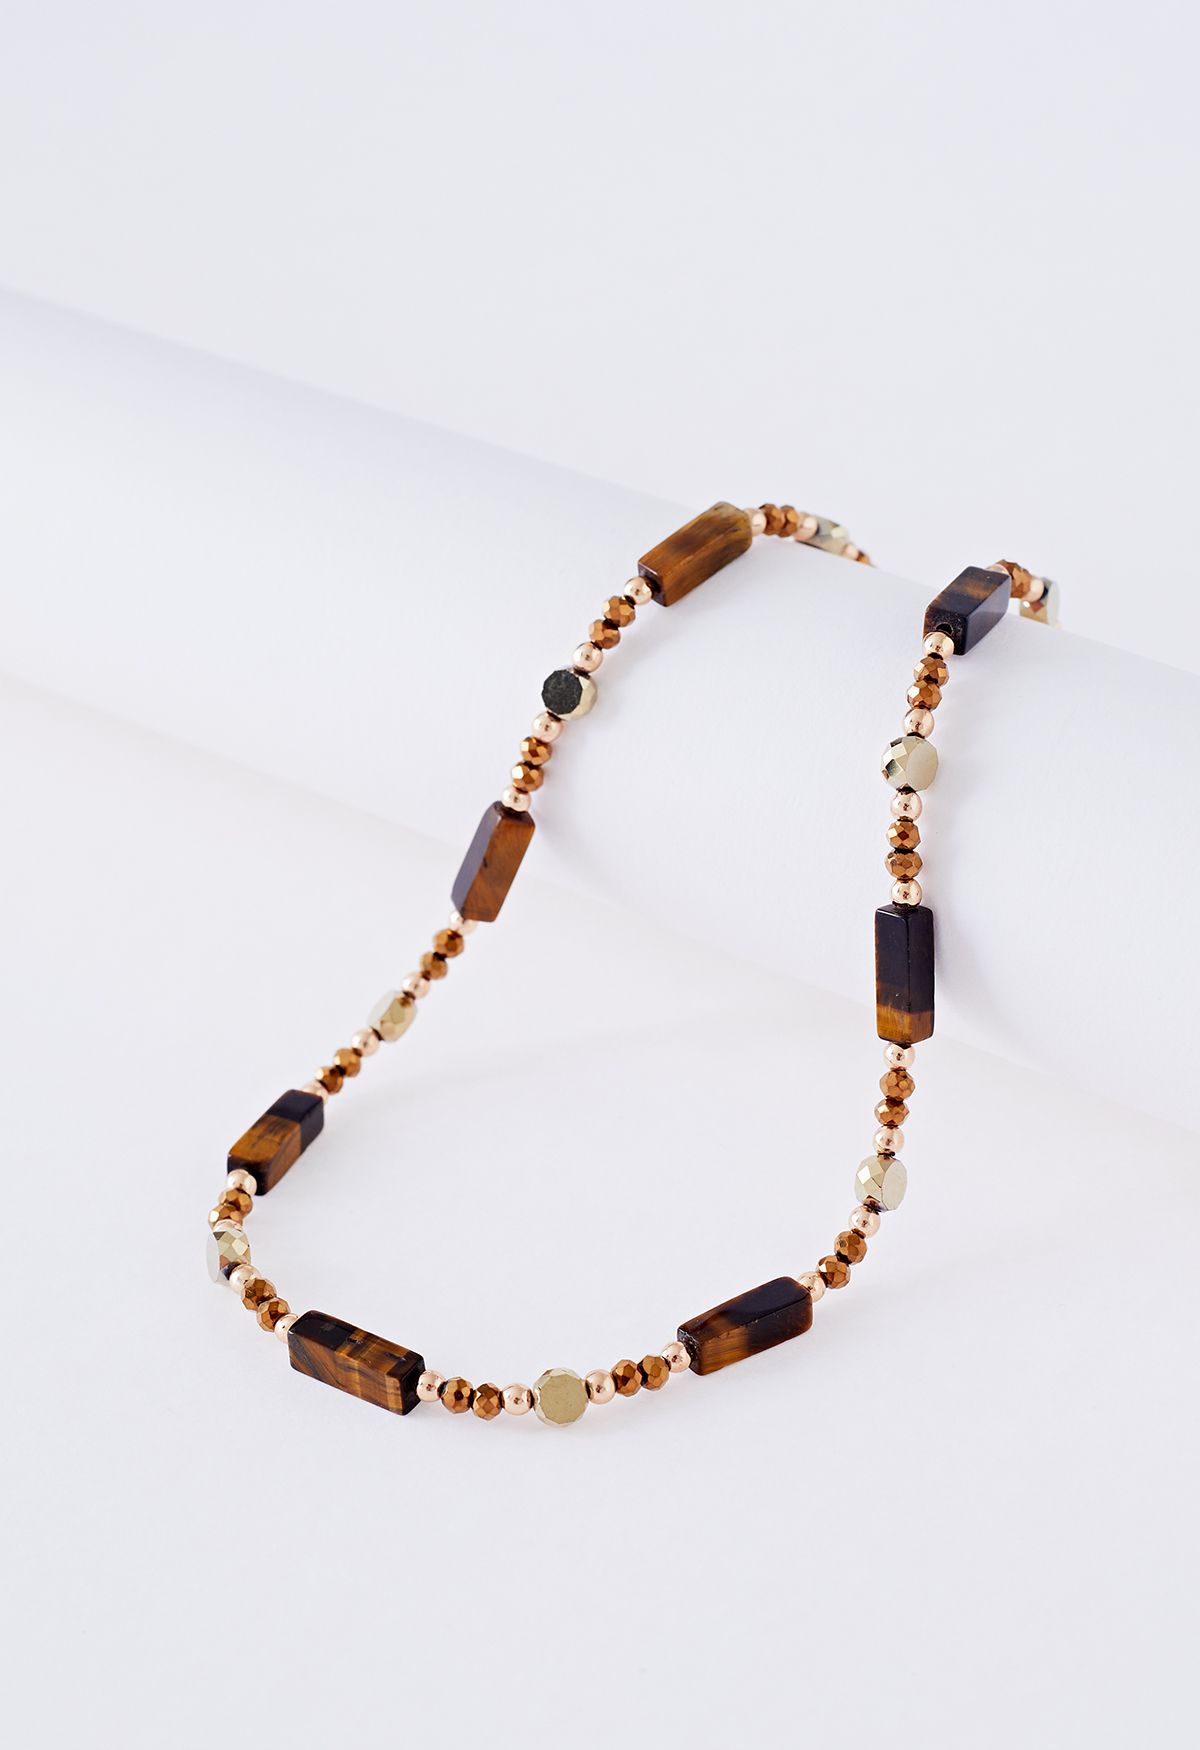 Natural Tiger's Eye Spliced Beaded Necklace